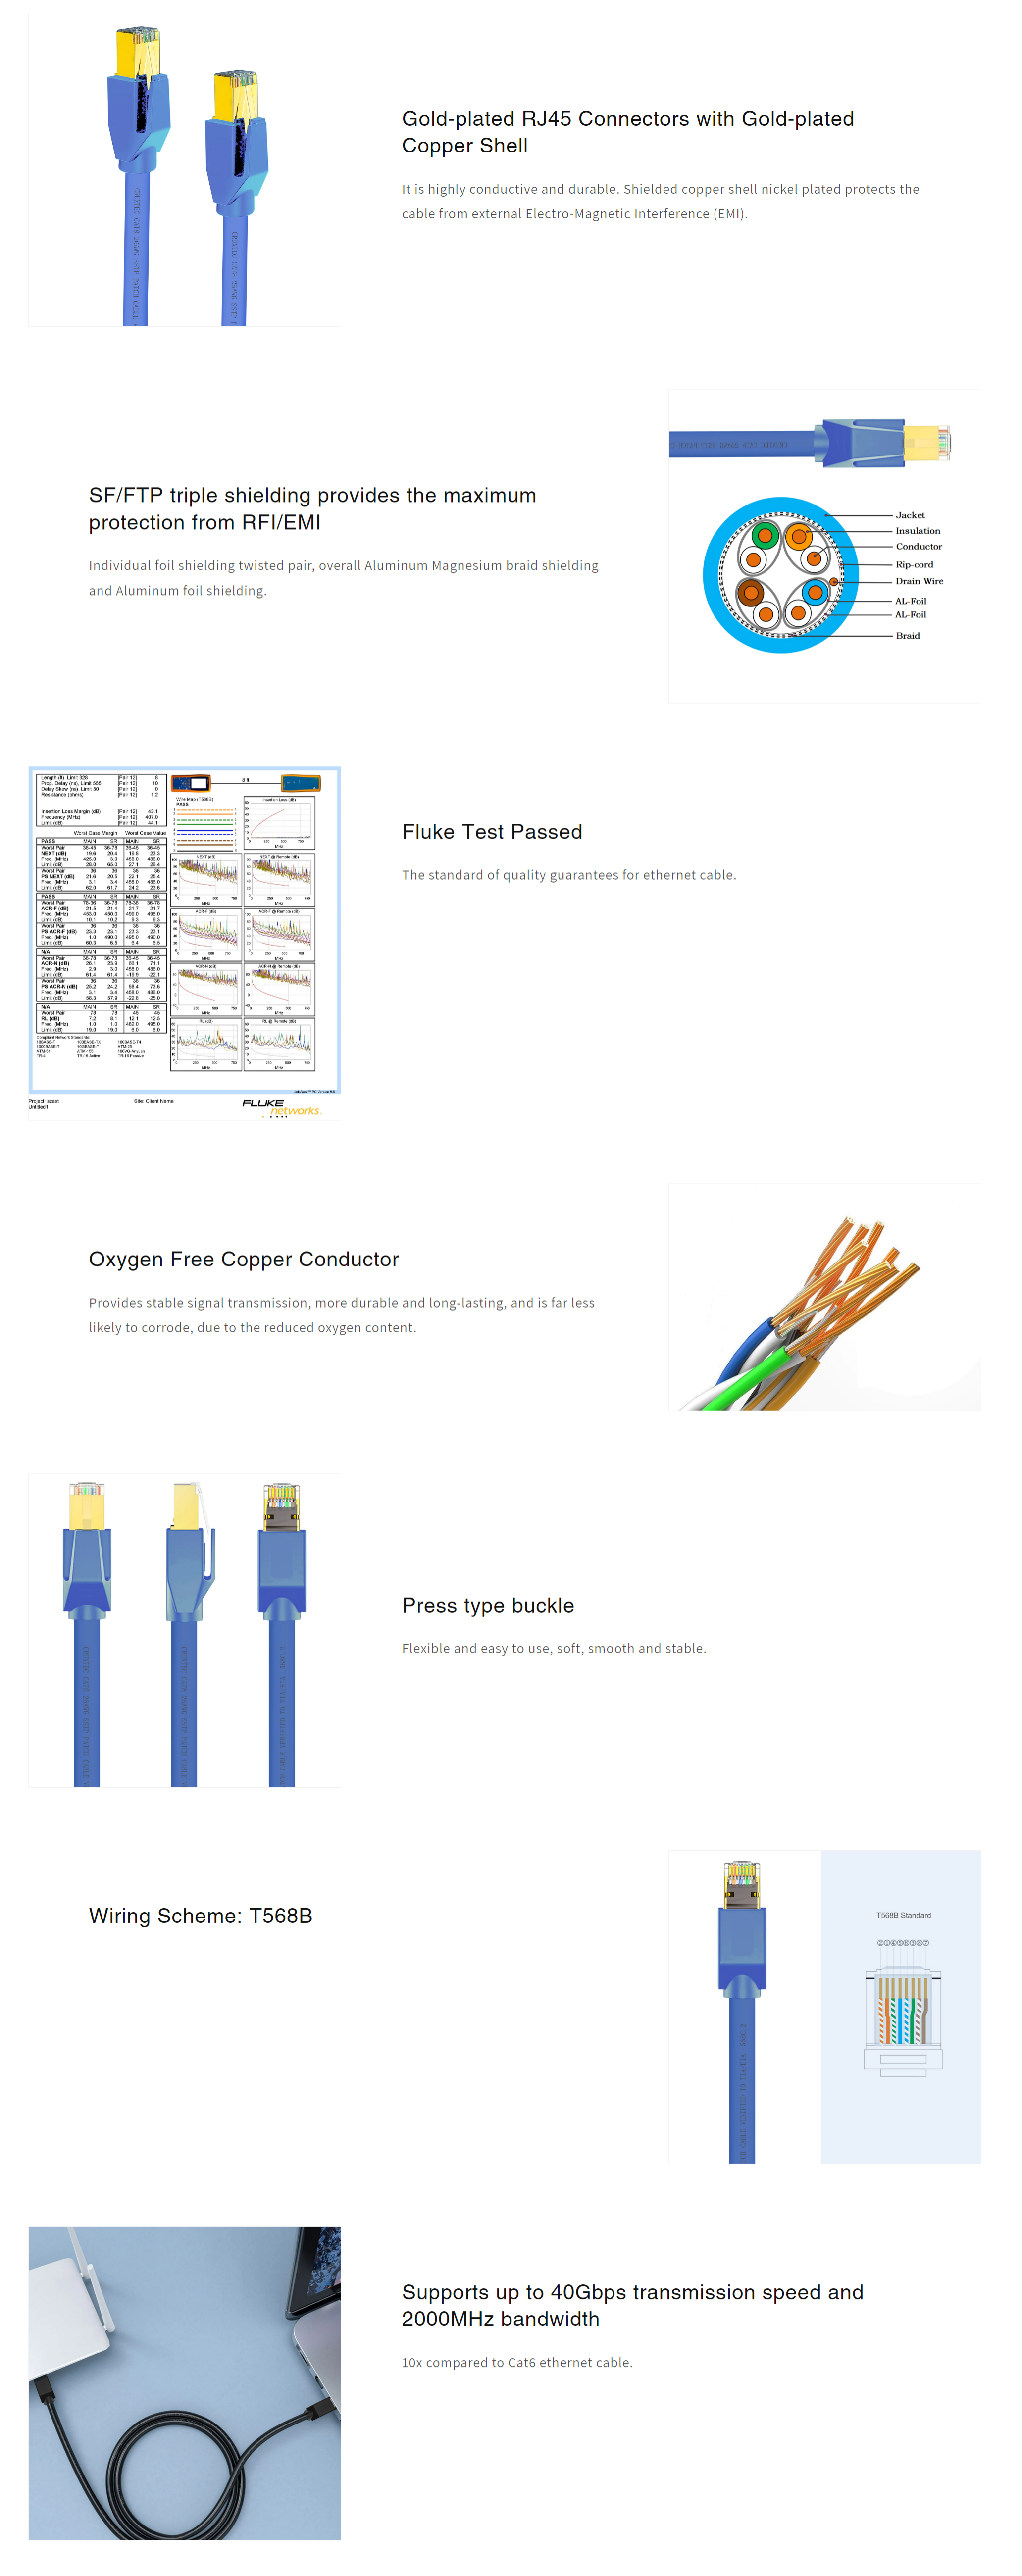 A large marketing image providing additional information about the product Cruxtec CAT8 0.3m 40GbE SF/FTP Triple Shielding Ethernet Cable Blue - Additional alt info not provided